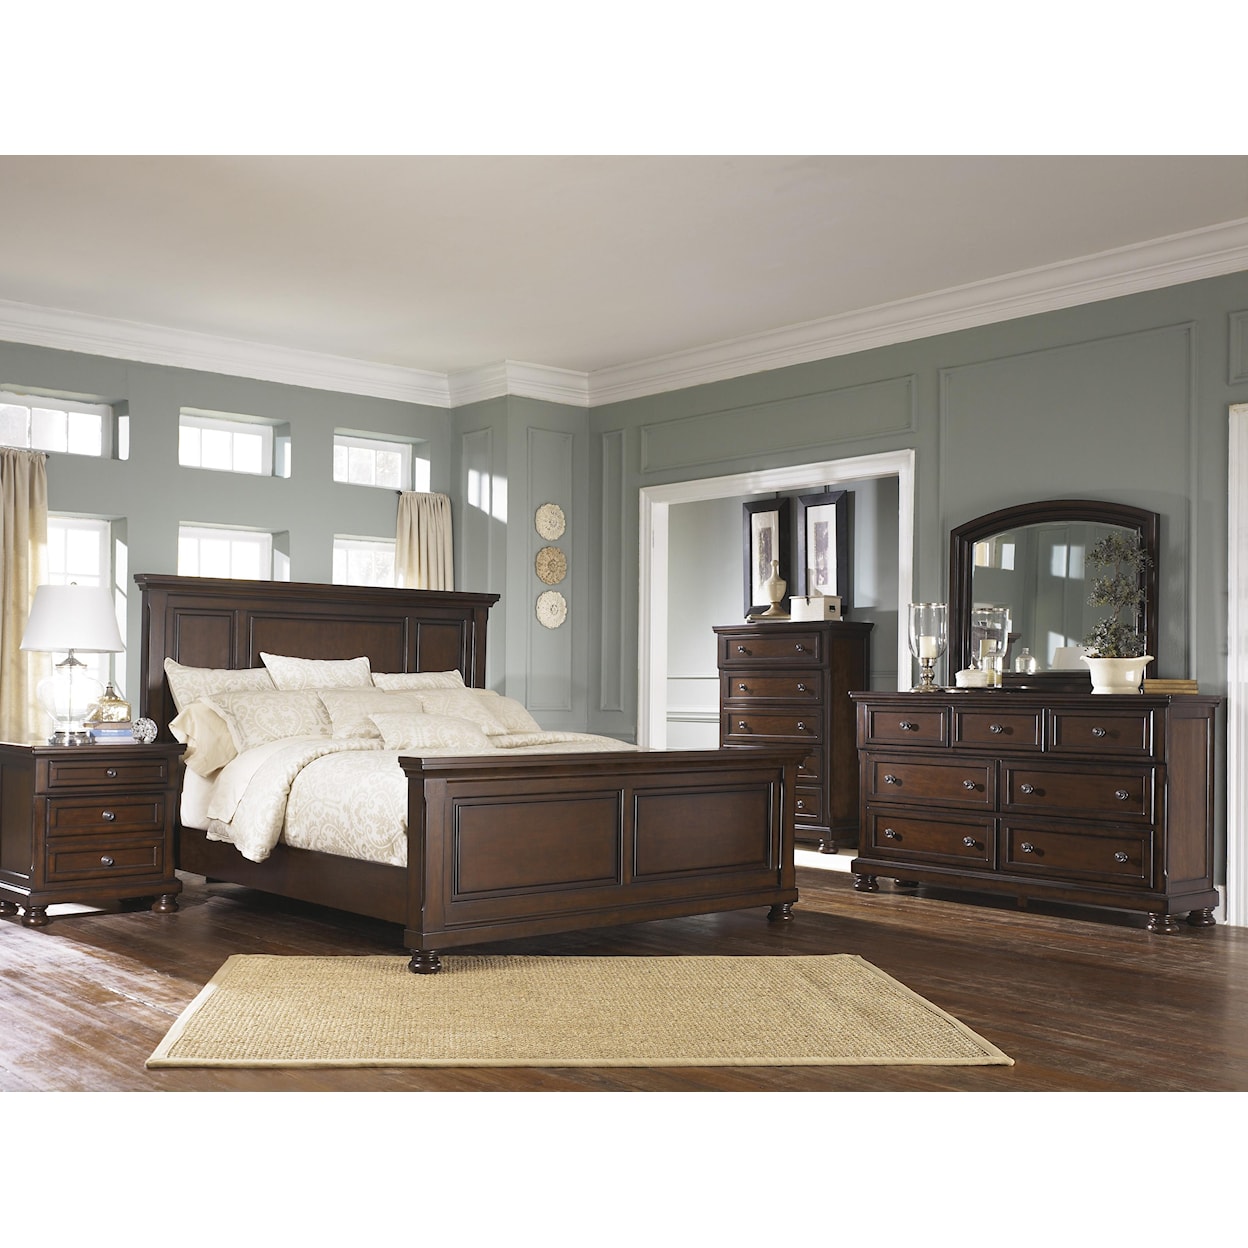 Ashley Furniture Porter House Queen Bedroom Group